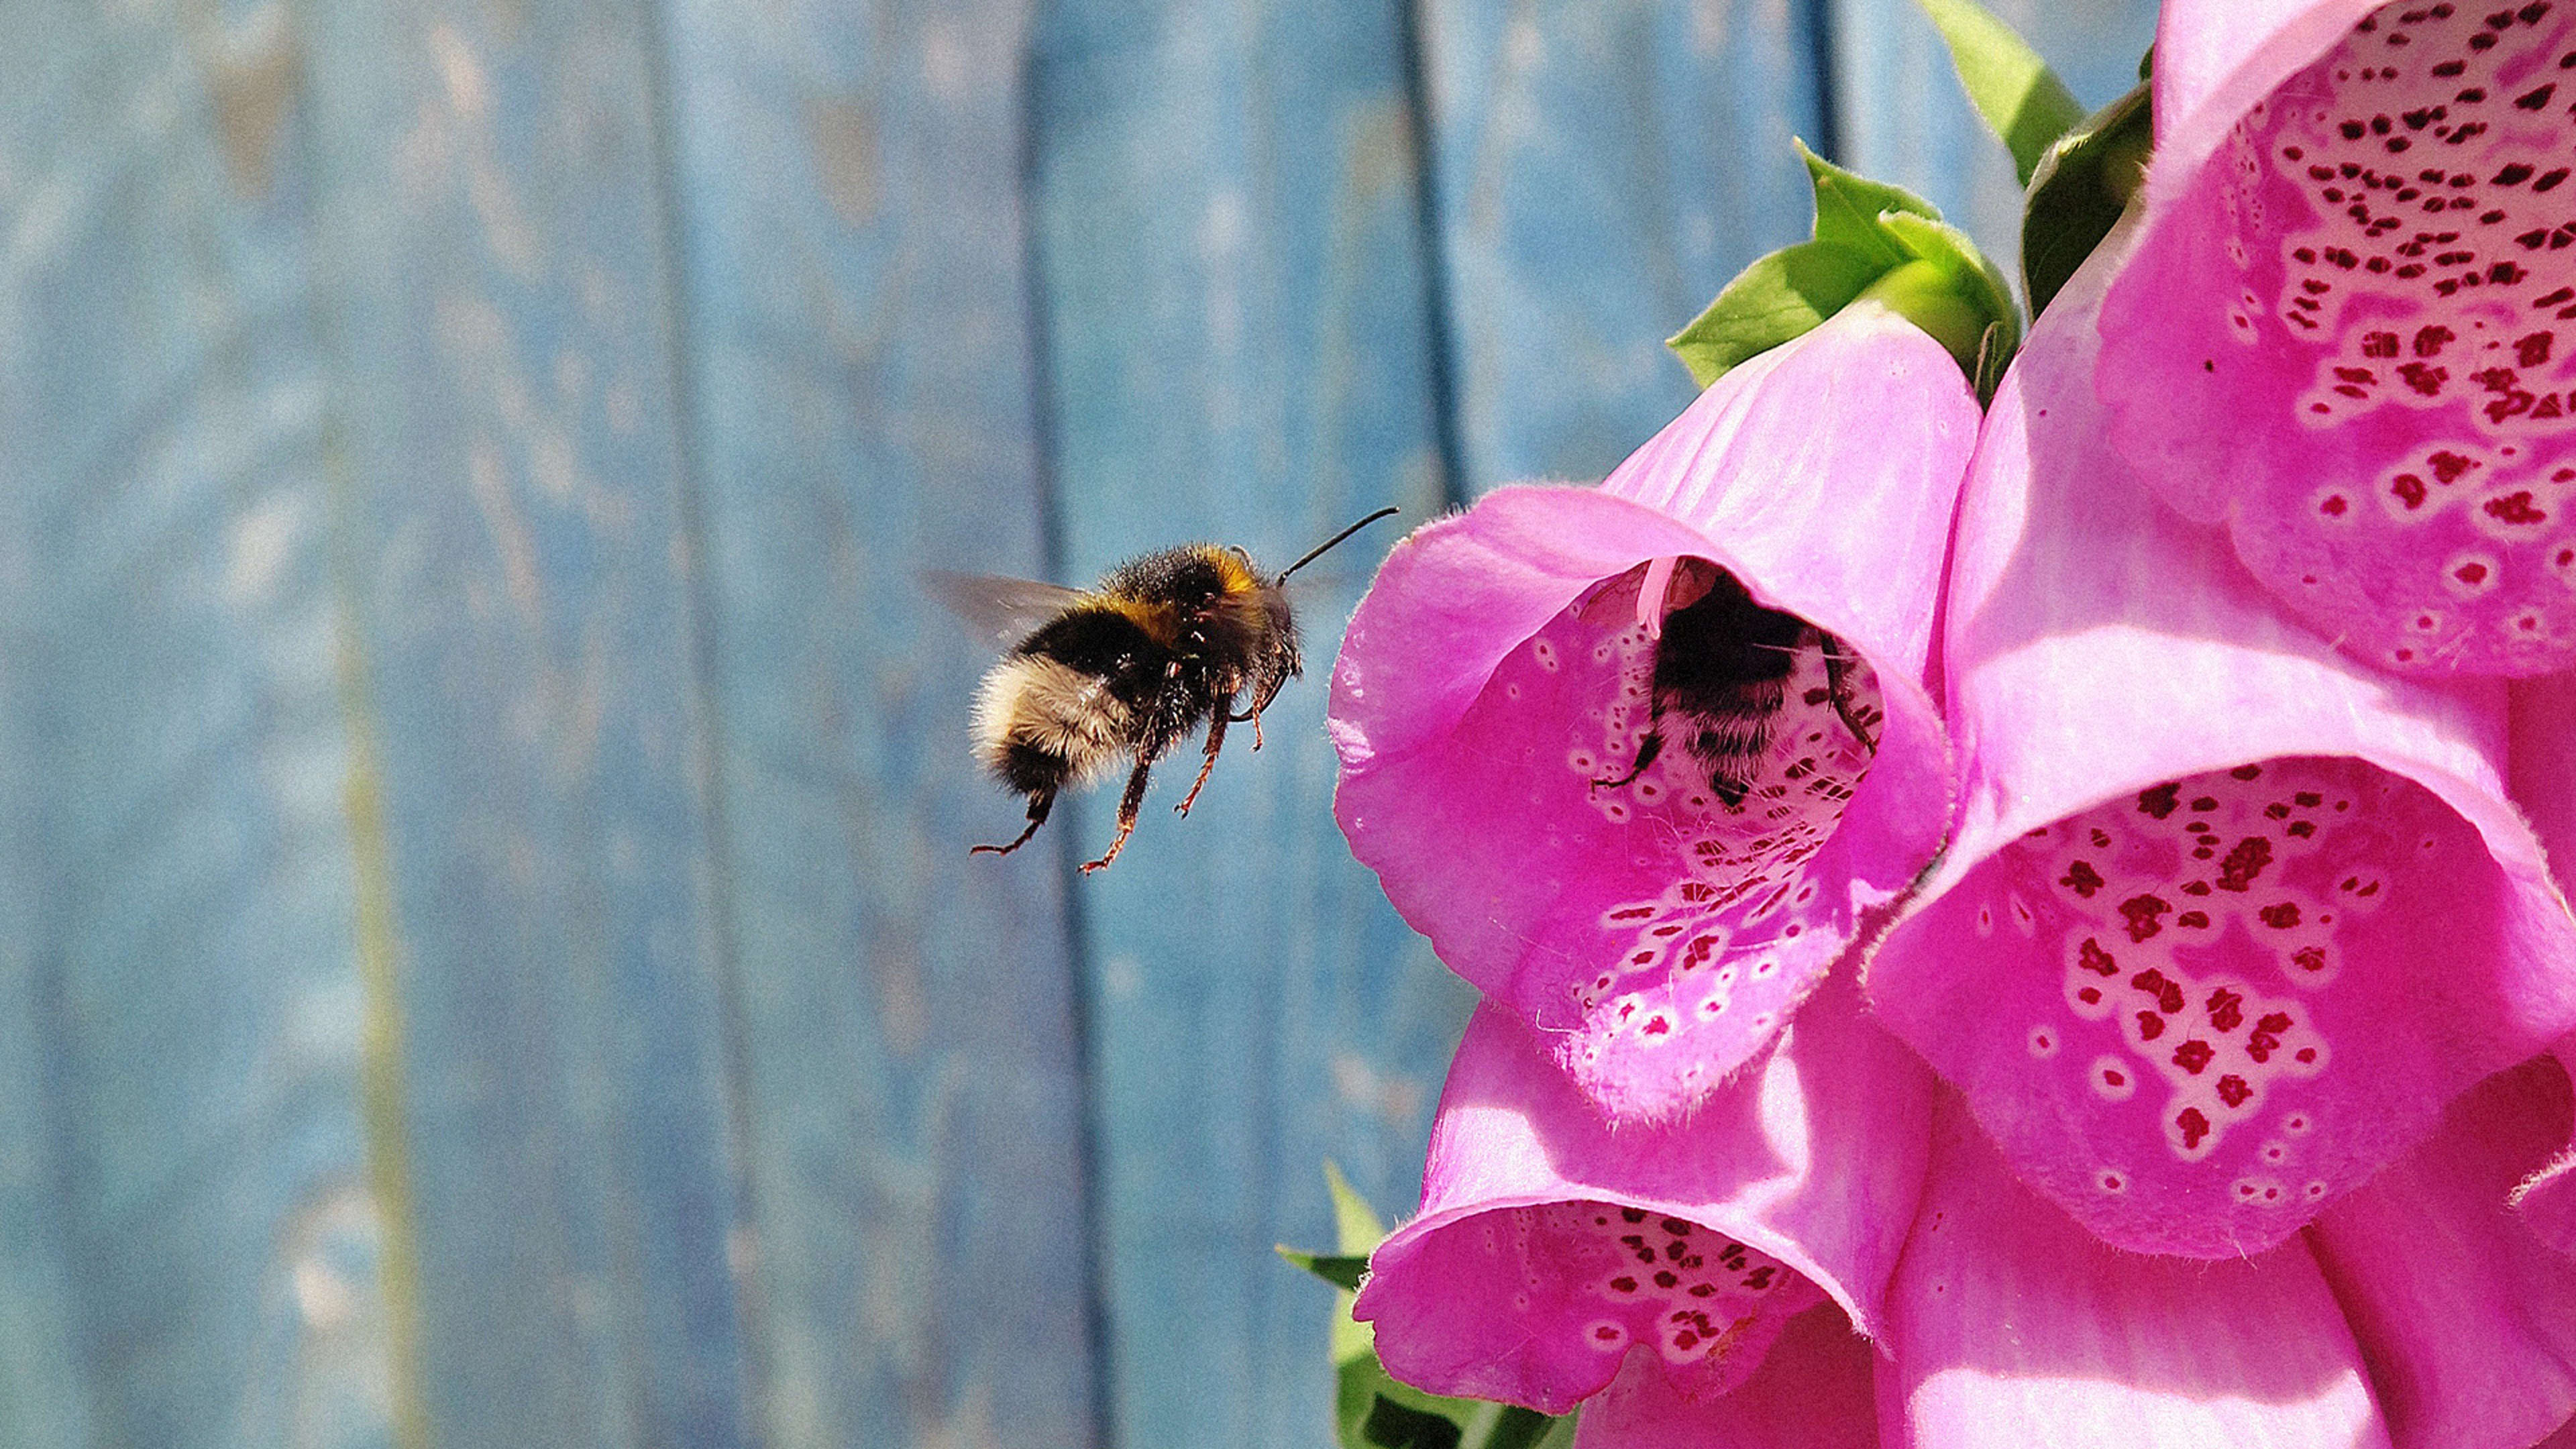 Scientists Want To Track The Nation’s Buzzes To Monitor The State Of Our Bees